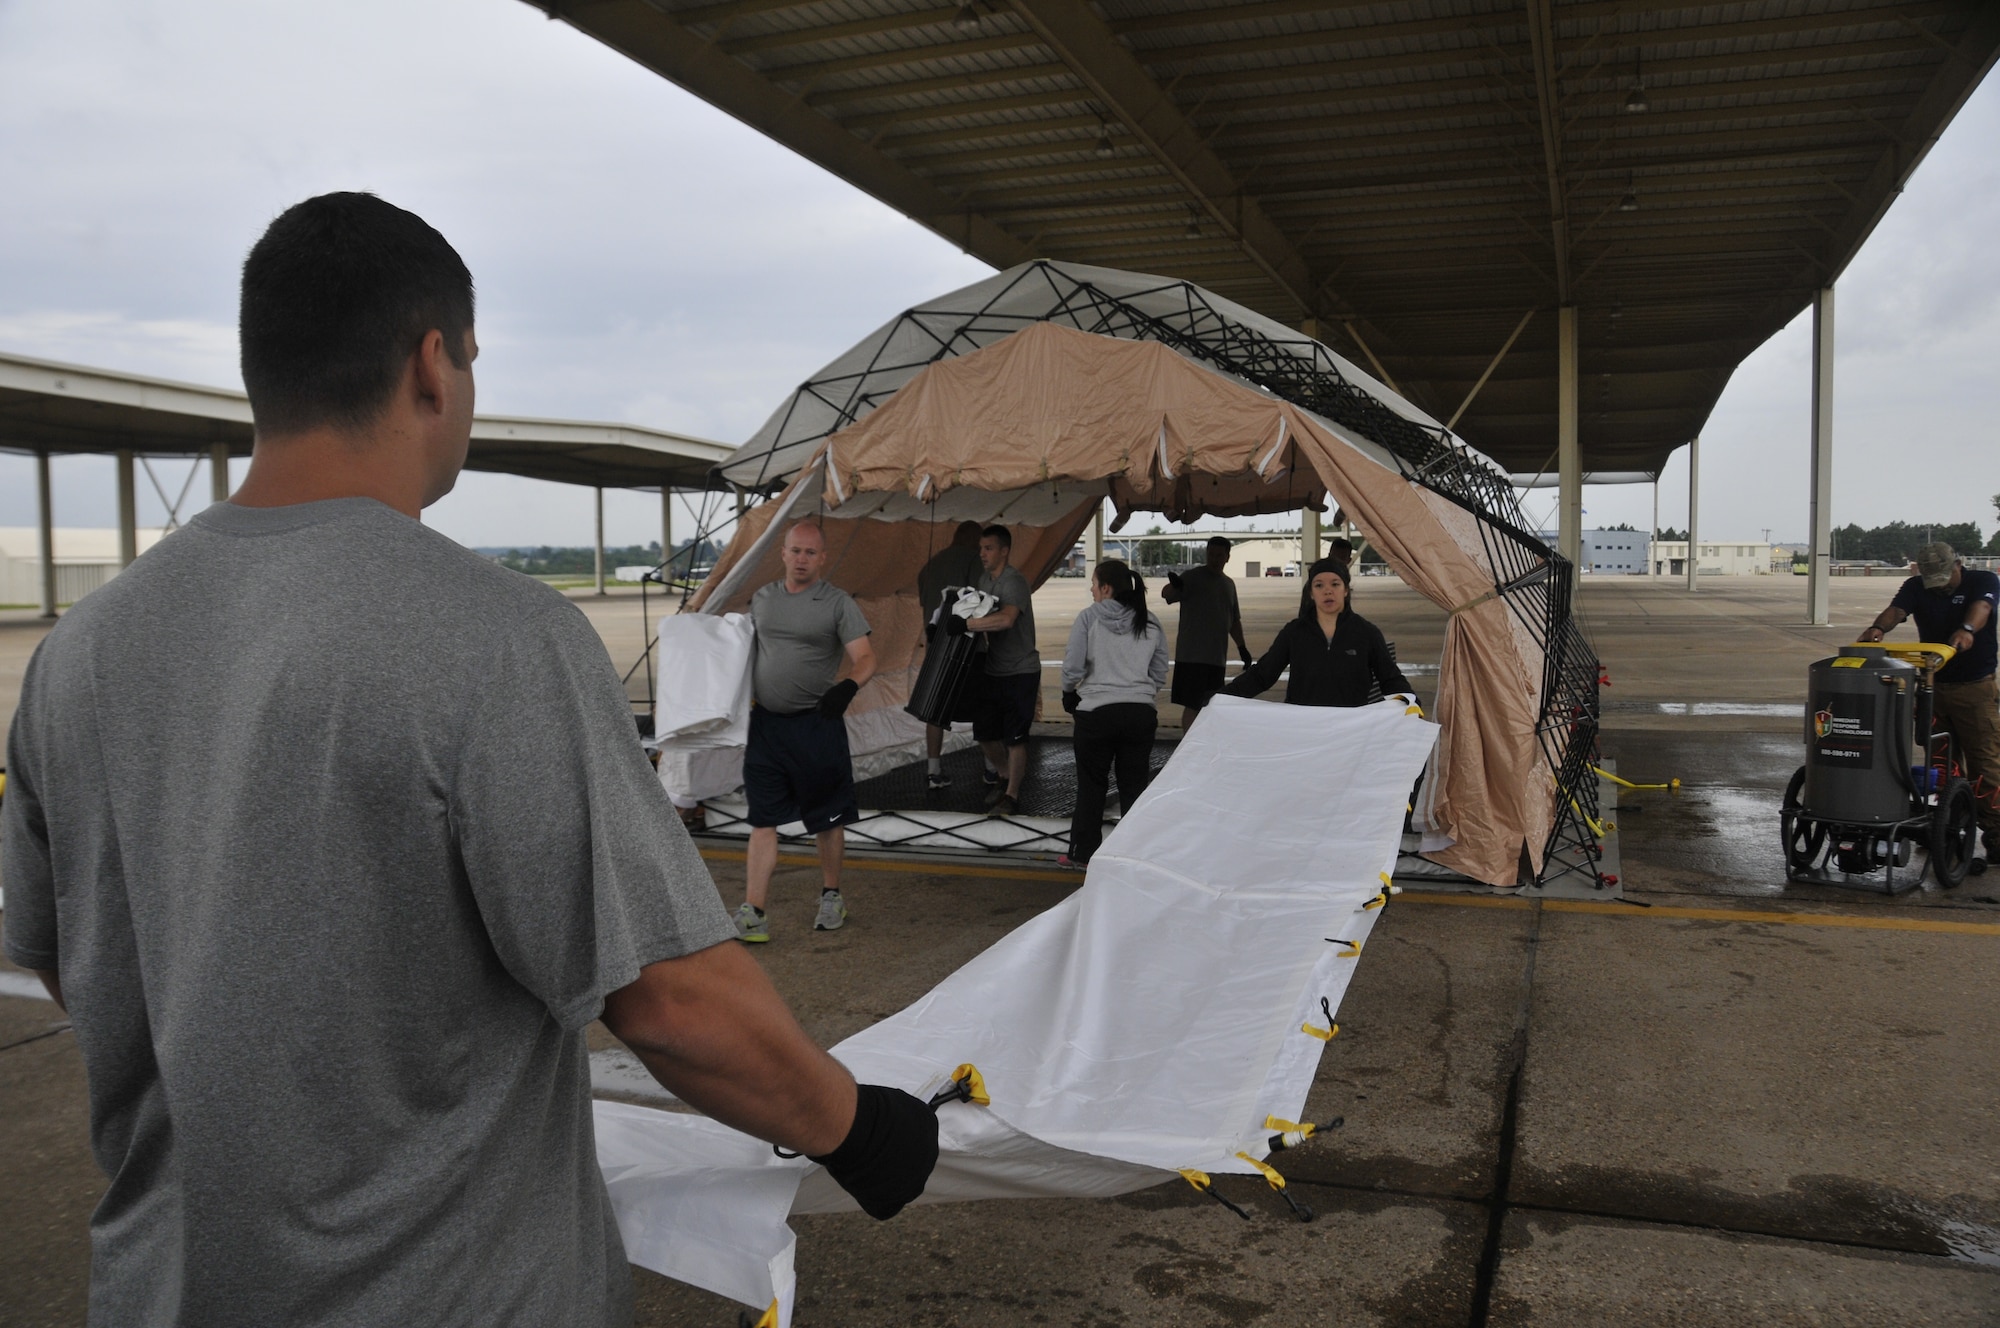 Airmen from the 188th Wing set up a medical decontamination tent during decon training at Ebbing Air National Guard Base, Arkansas, July 17. The volunteers, who were from various parts of the wing, learned how to set up a decontamination tent and clean victims of various chemical or nuclear hazards. This training will aid the wing in its mission to support Arkansas citizens in times of disaster. (U.S. Air National Guard photo by Staff Sgt. John Suleski/released)